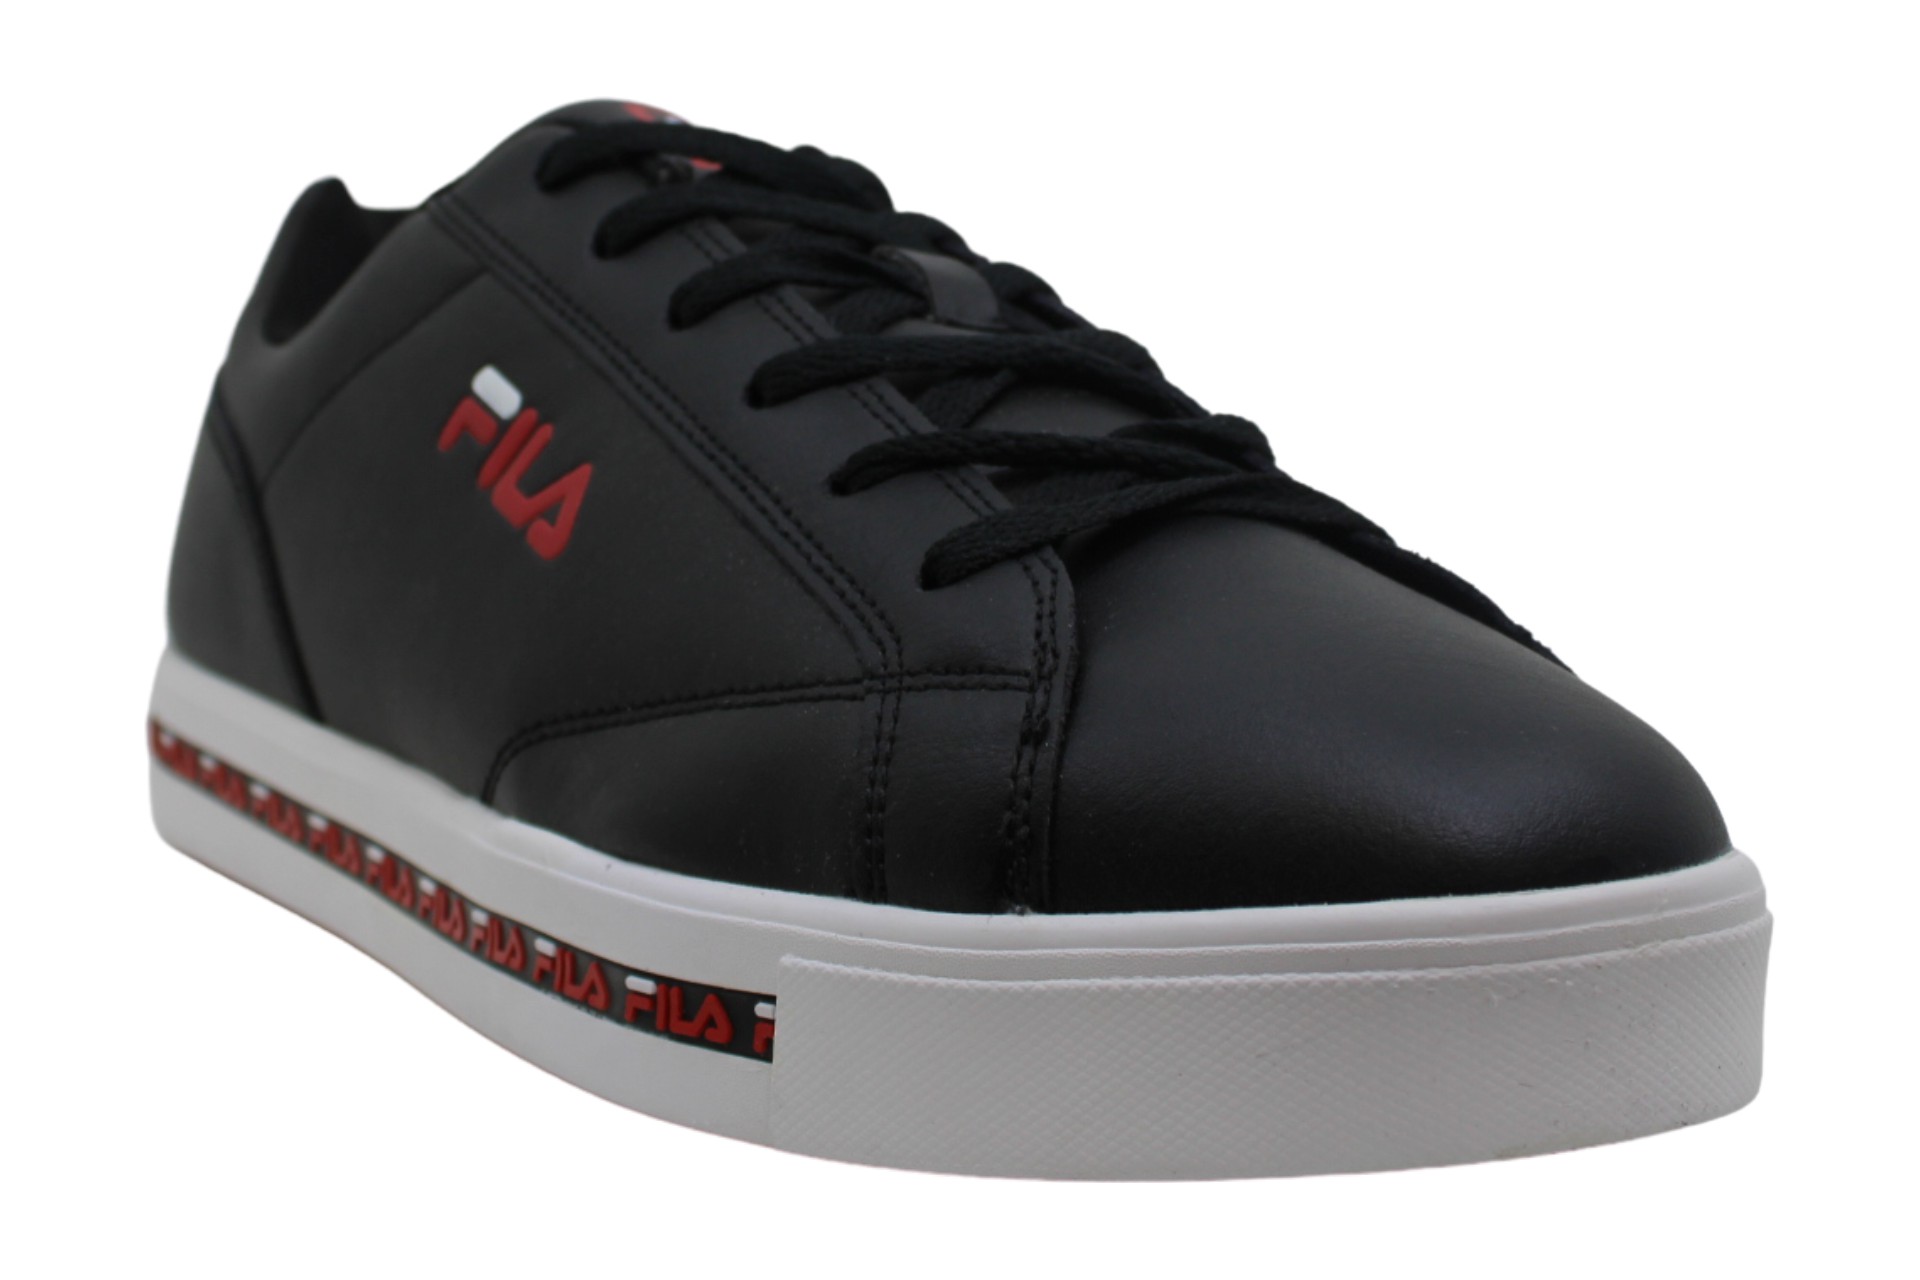 Fila Womens Original court leather Low Top Lace Up Fashion Sneakers | eBay